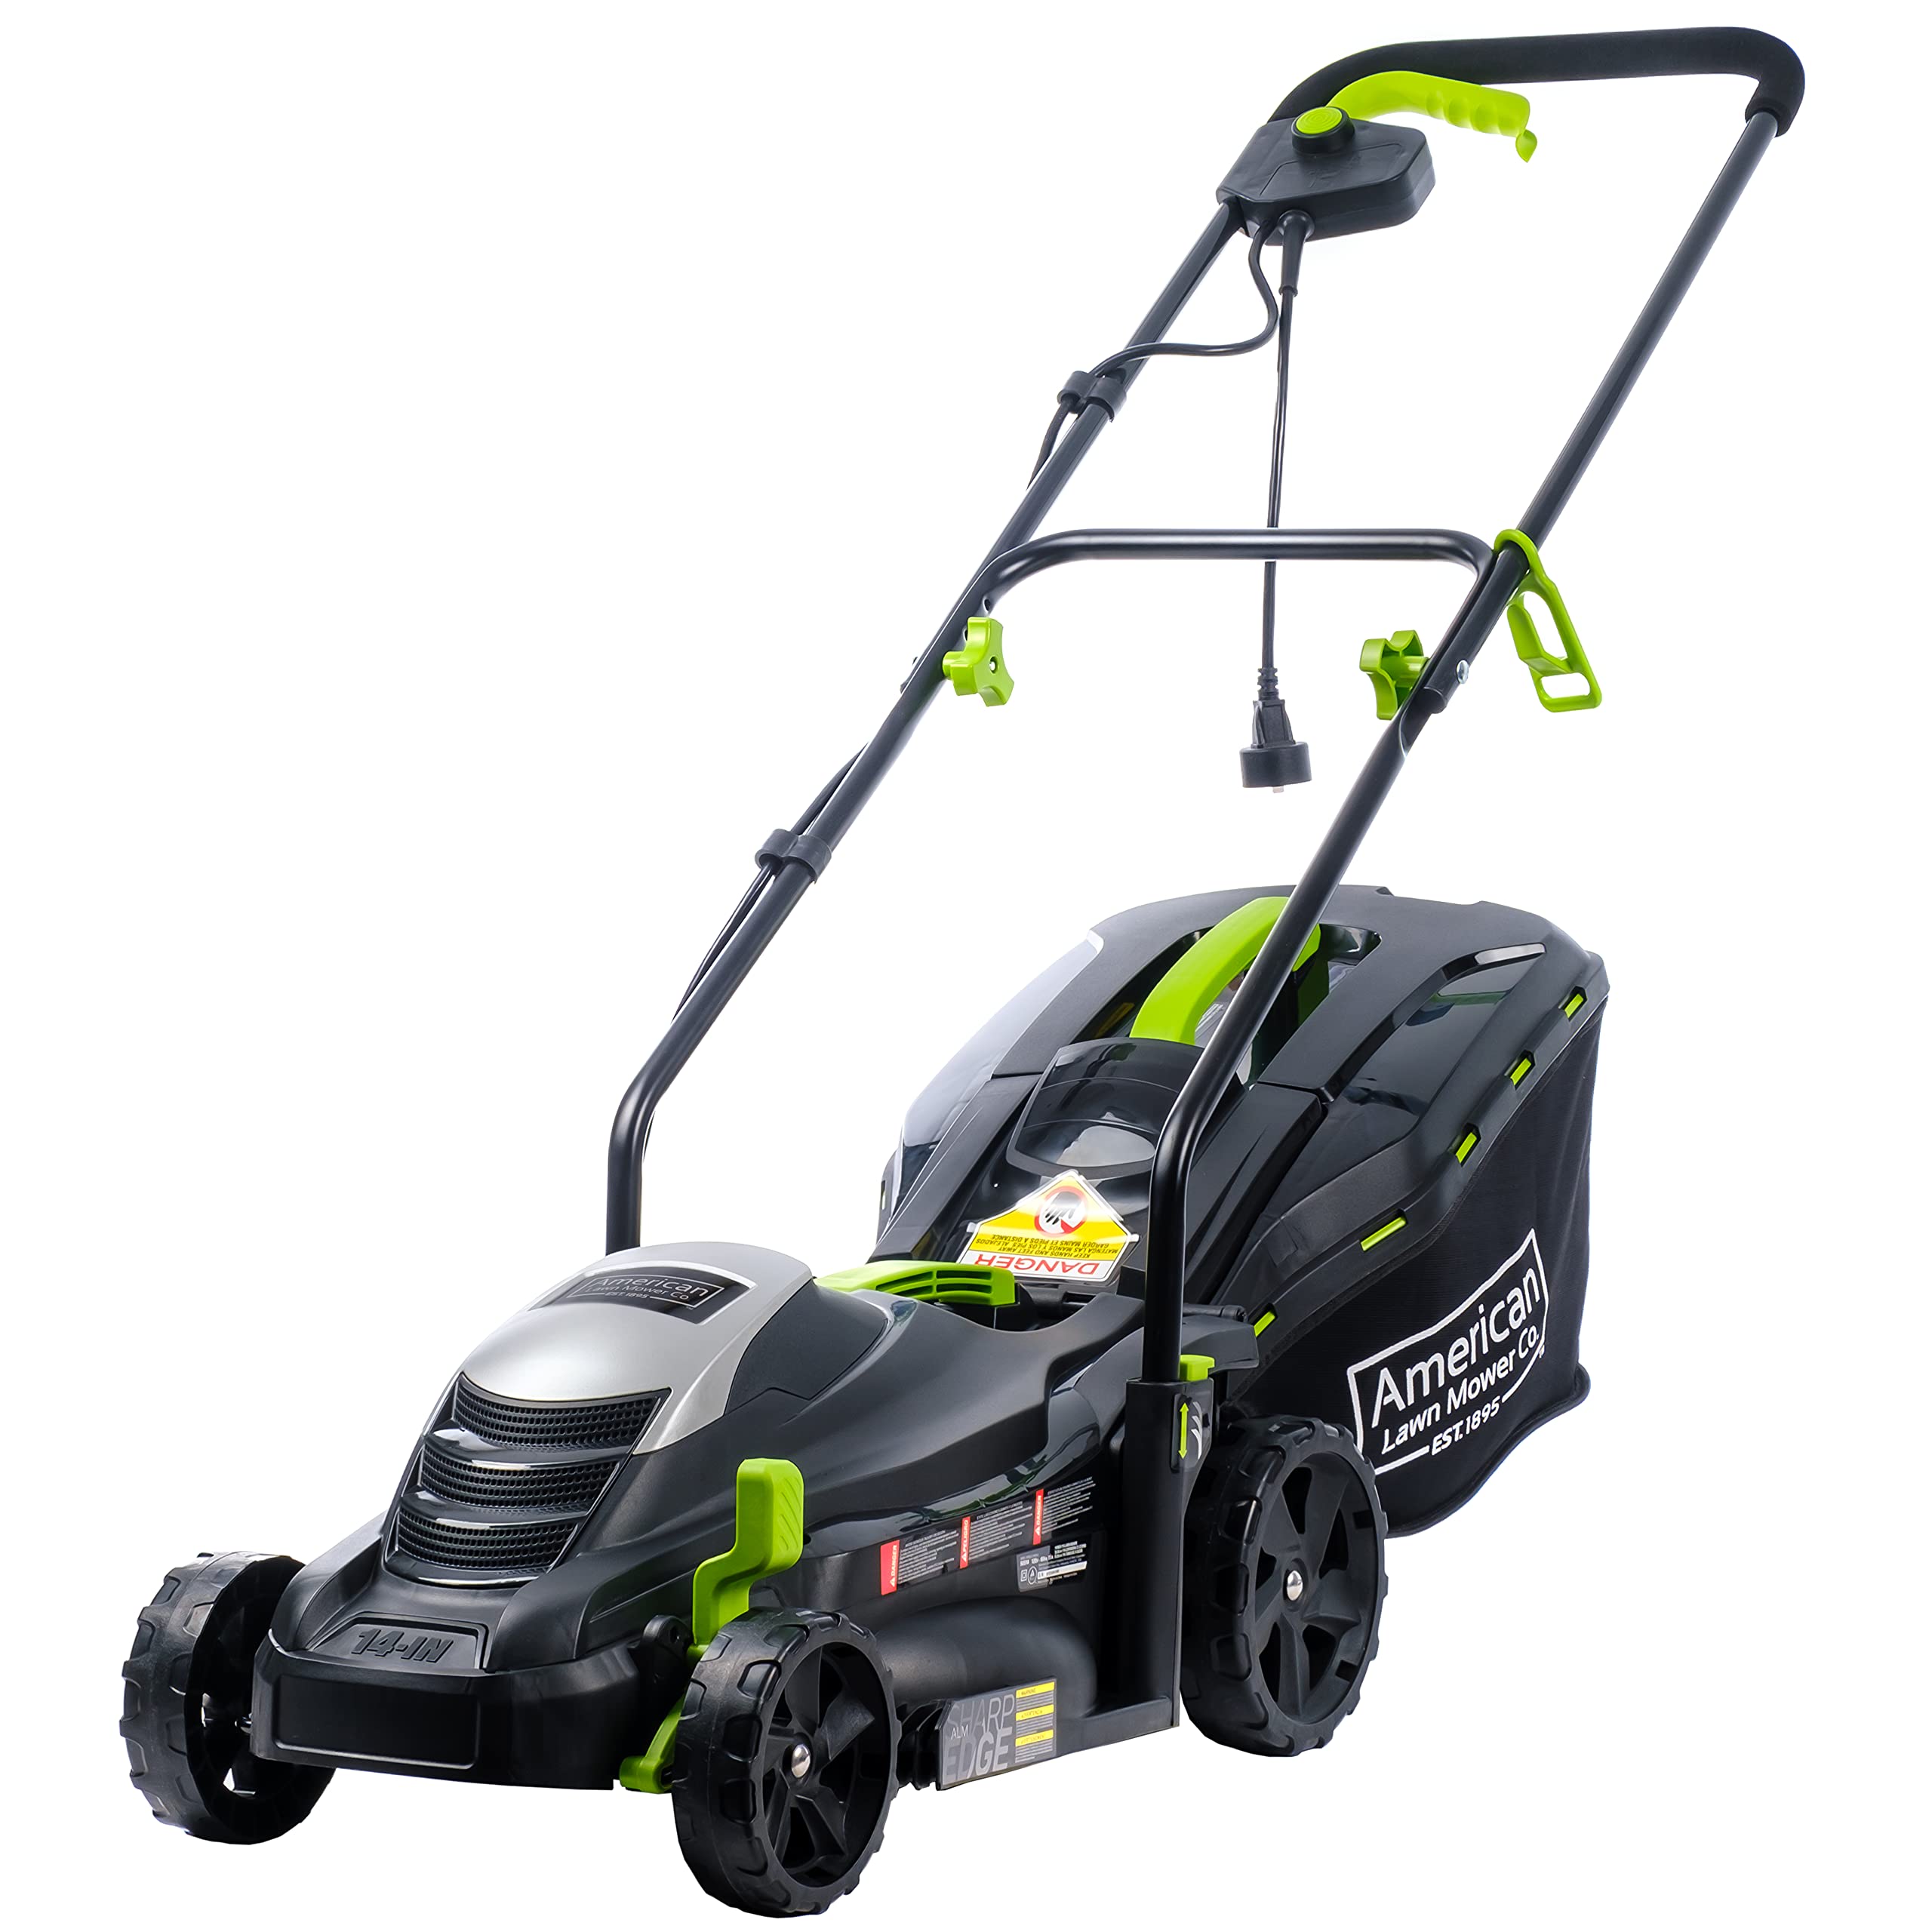 American Lawn Mower Company 50514 14" 11-Amp Corded Electric Lawn Mower